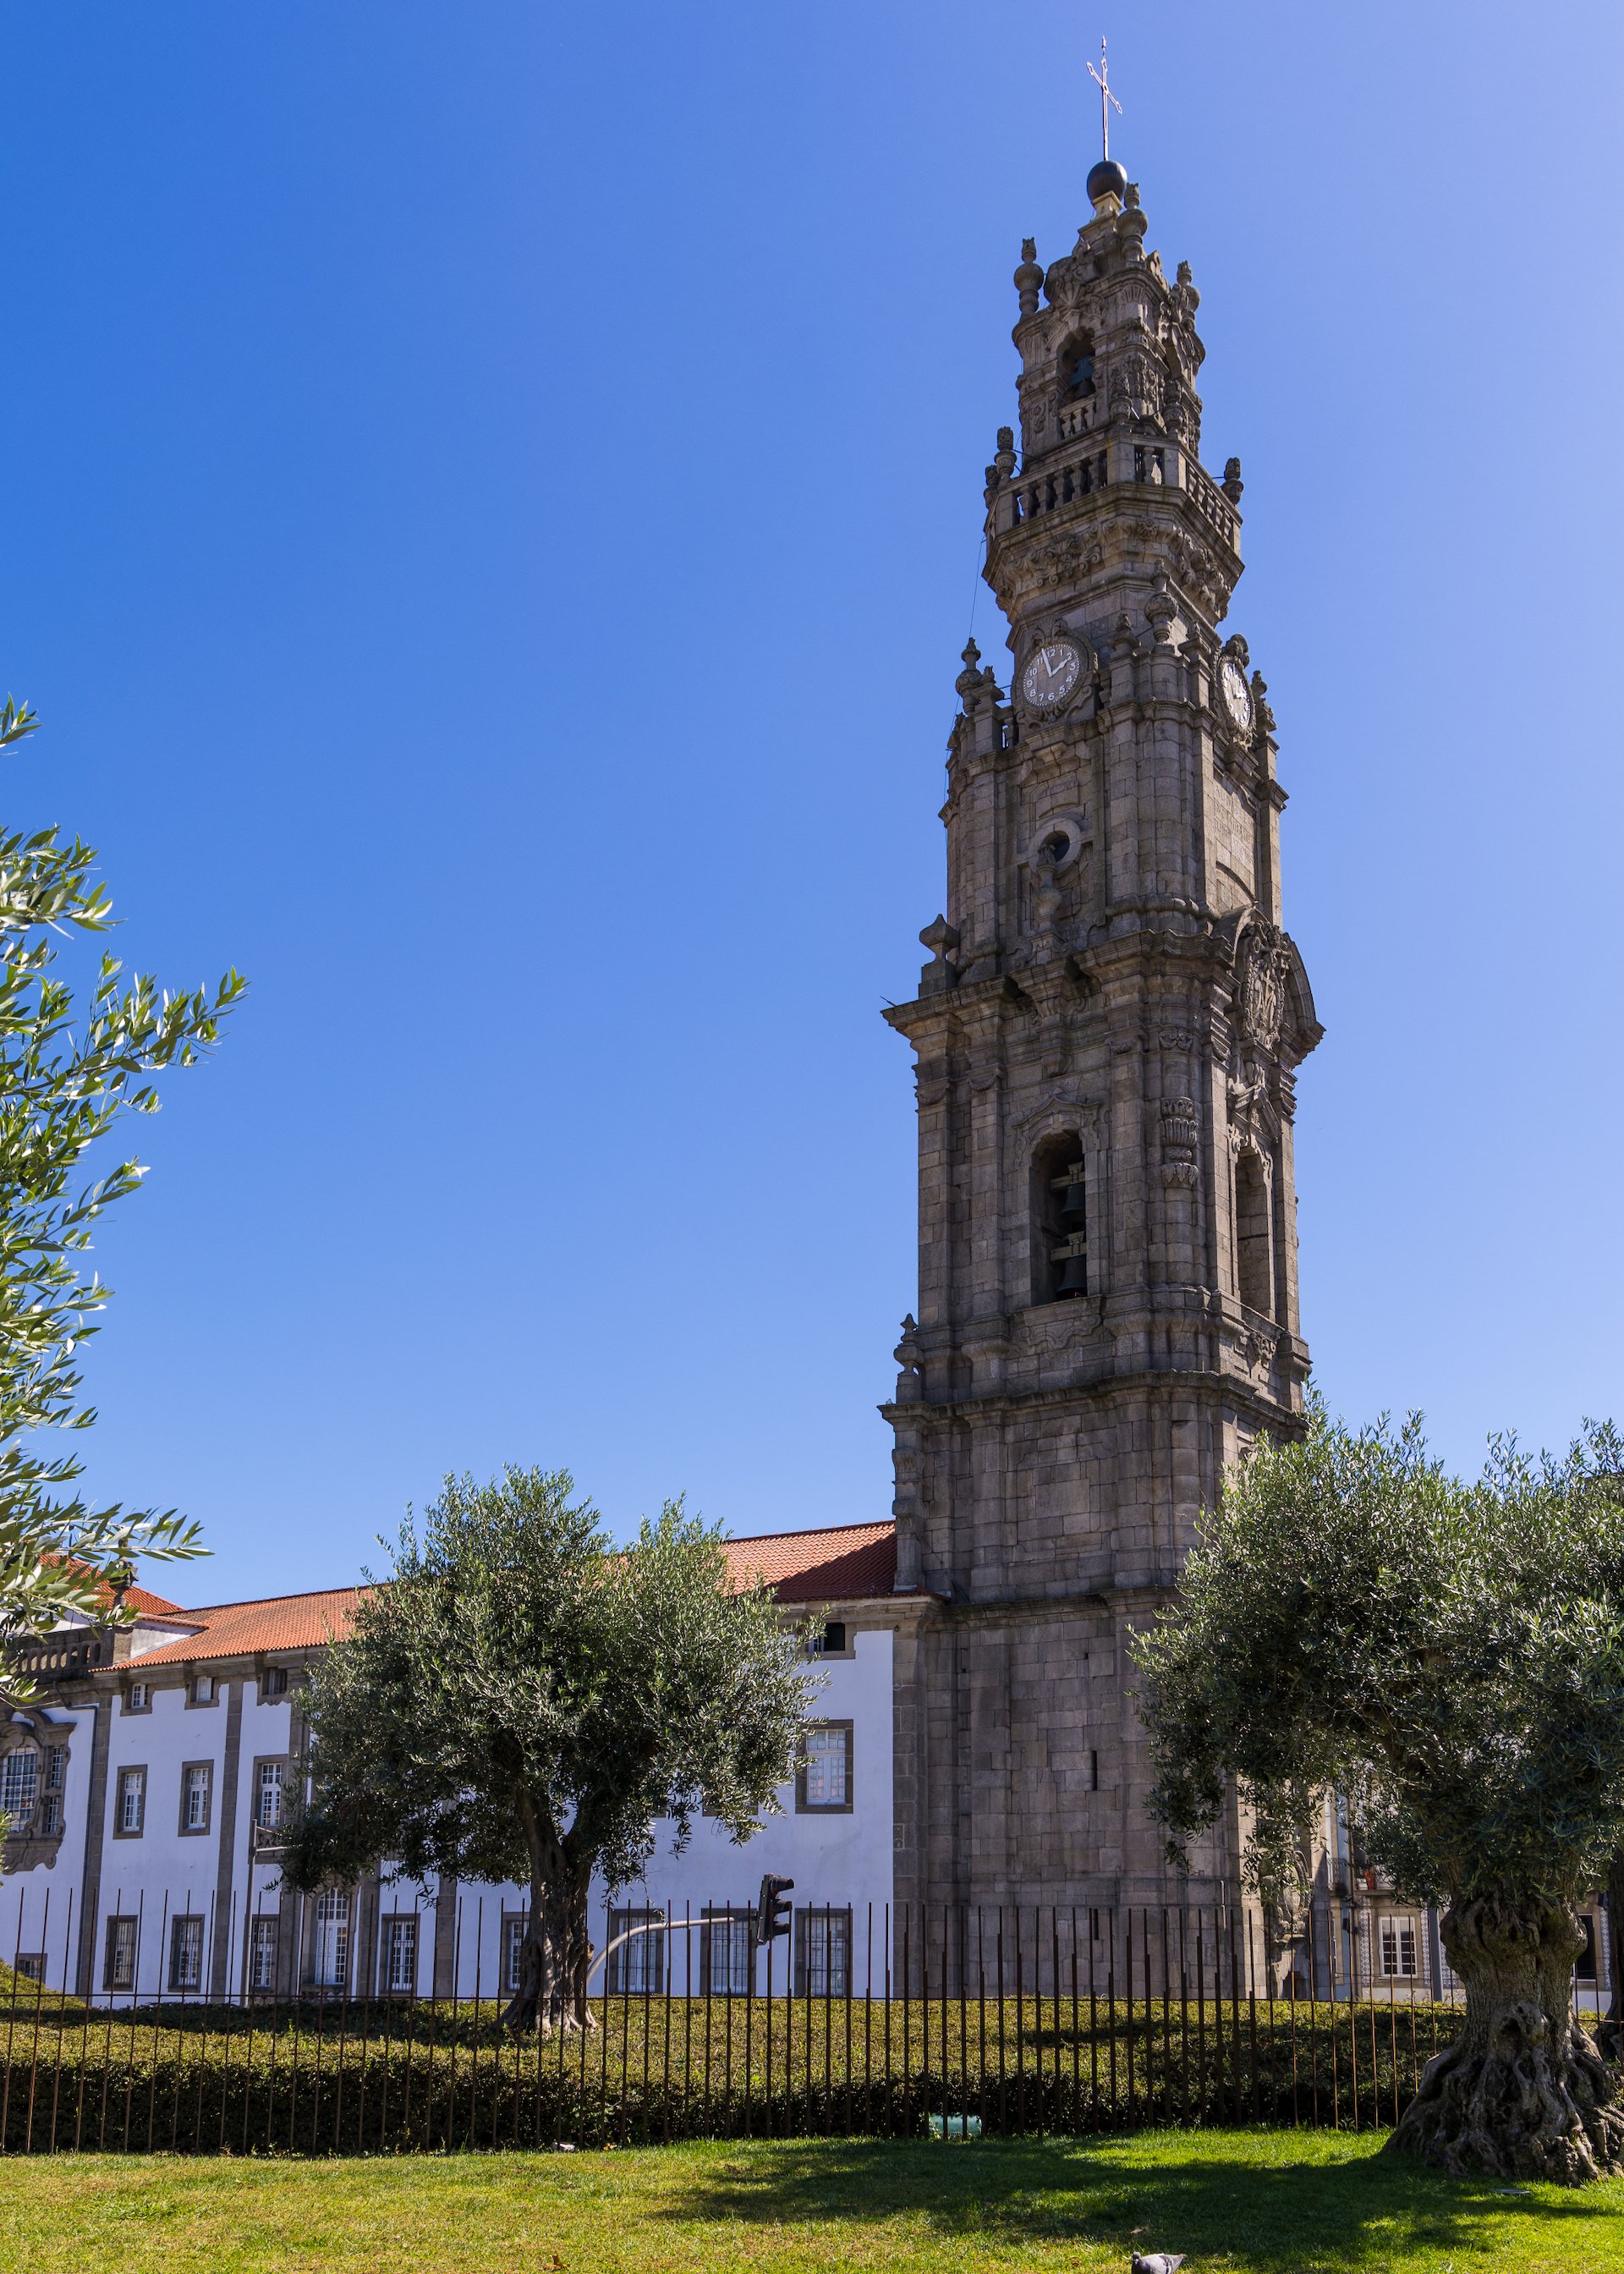  The Clérigos Church or "Church of the Clergymen" is a Baroque church in Porto. Its 75-meter-tall bell tower, the Torre dos Clérigos, can be seen from various points of the city and is one of its most characteristic symbols. 